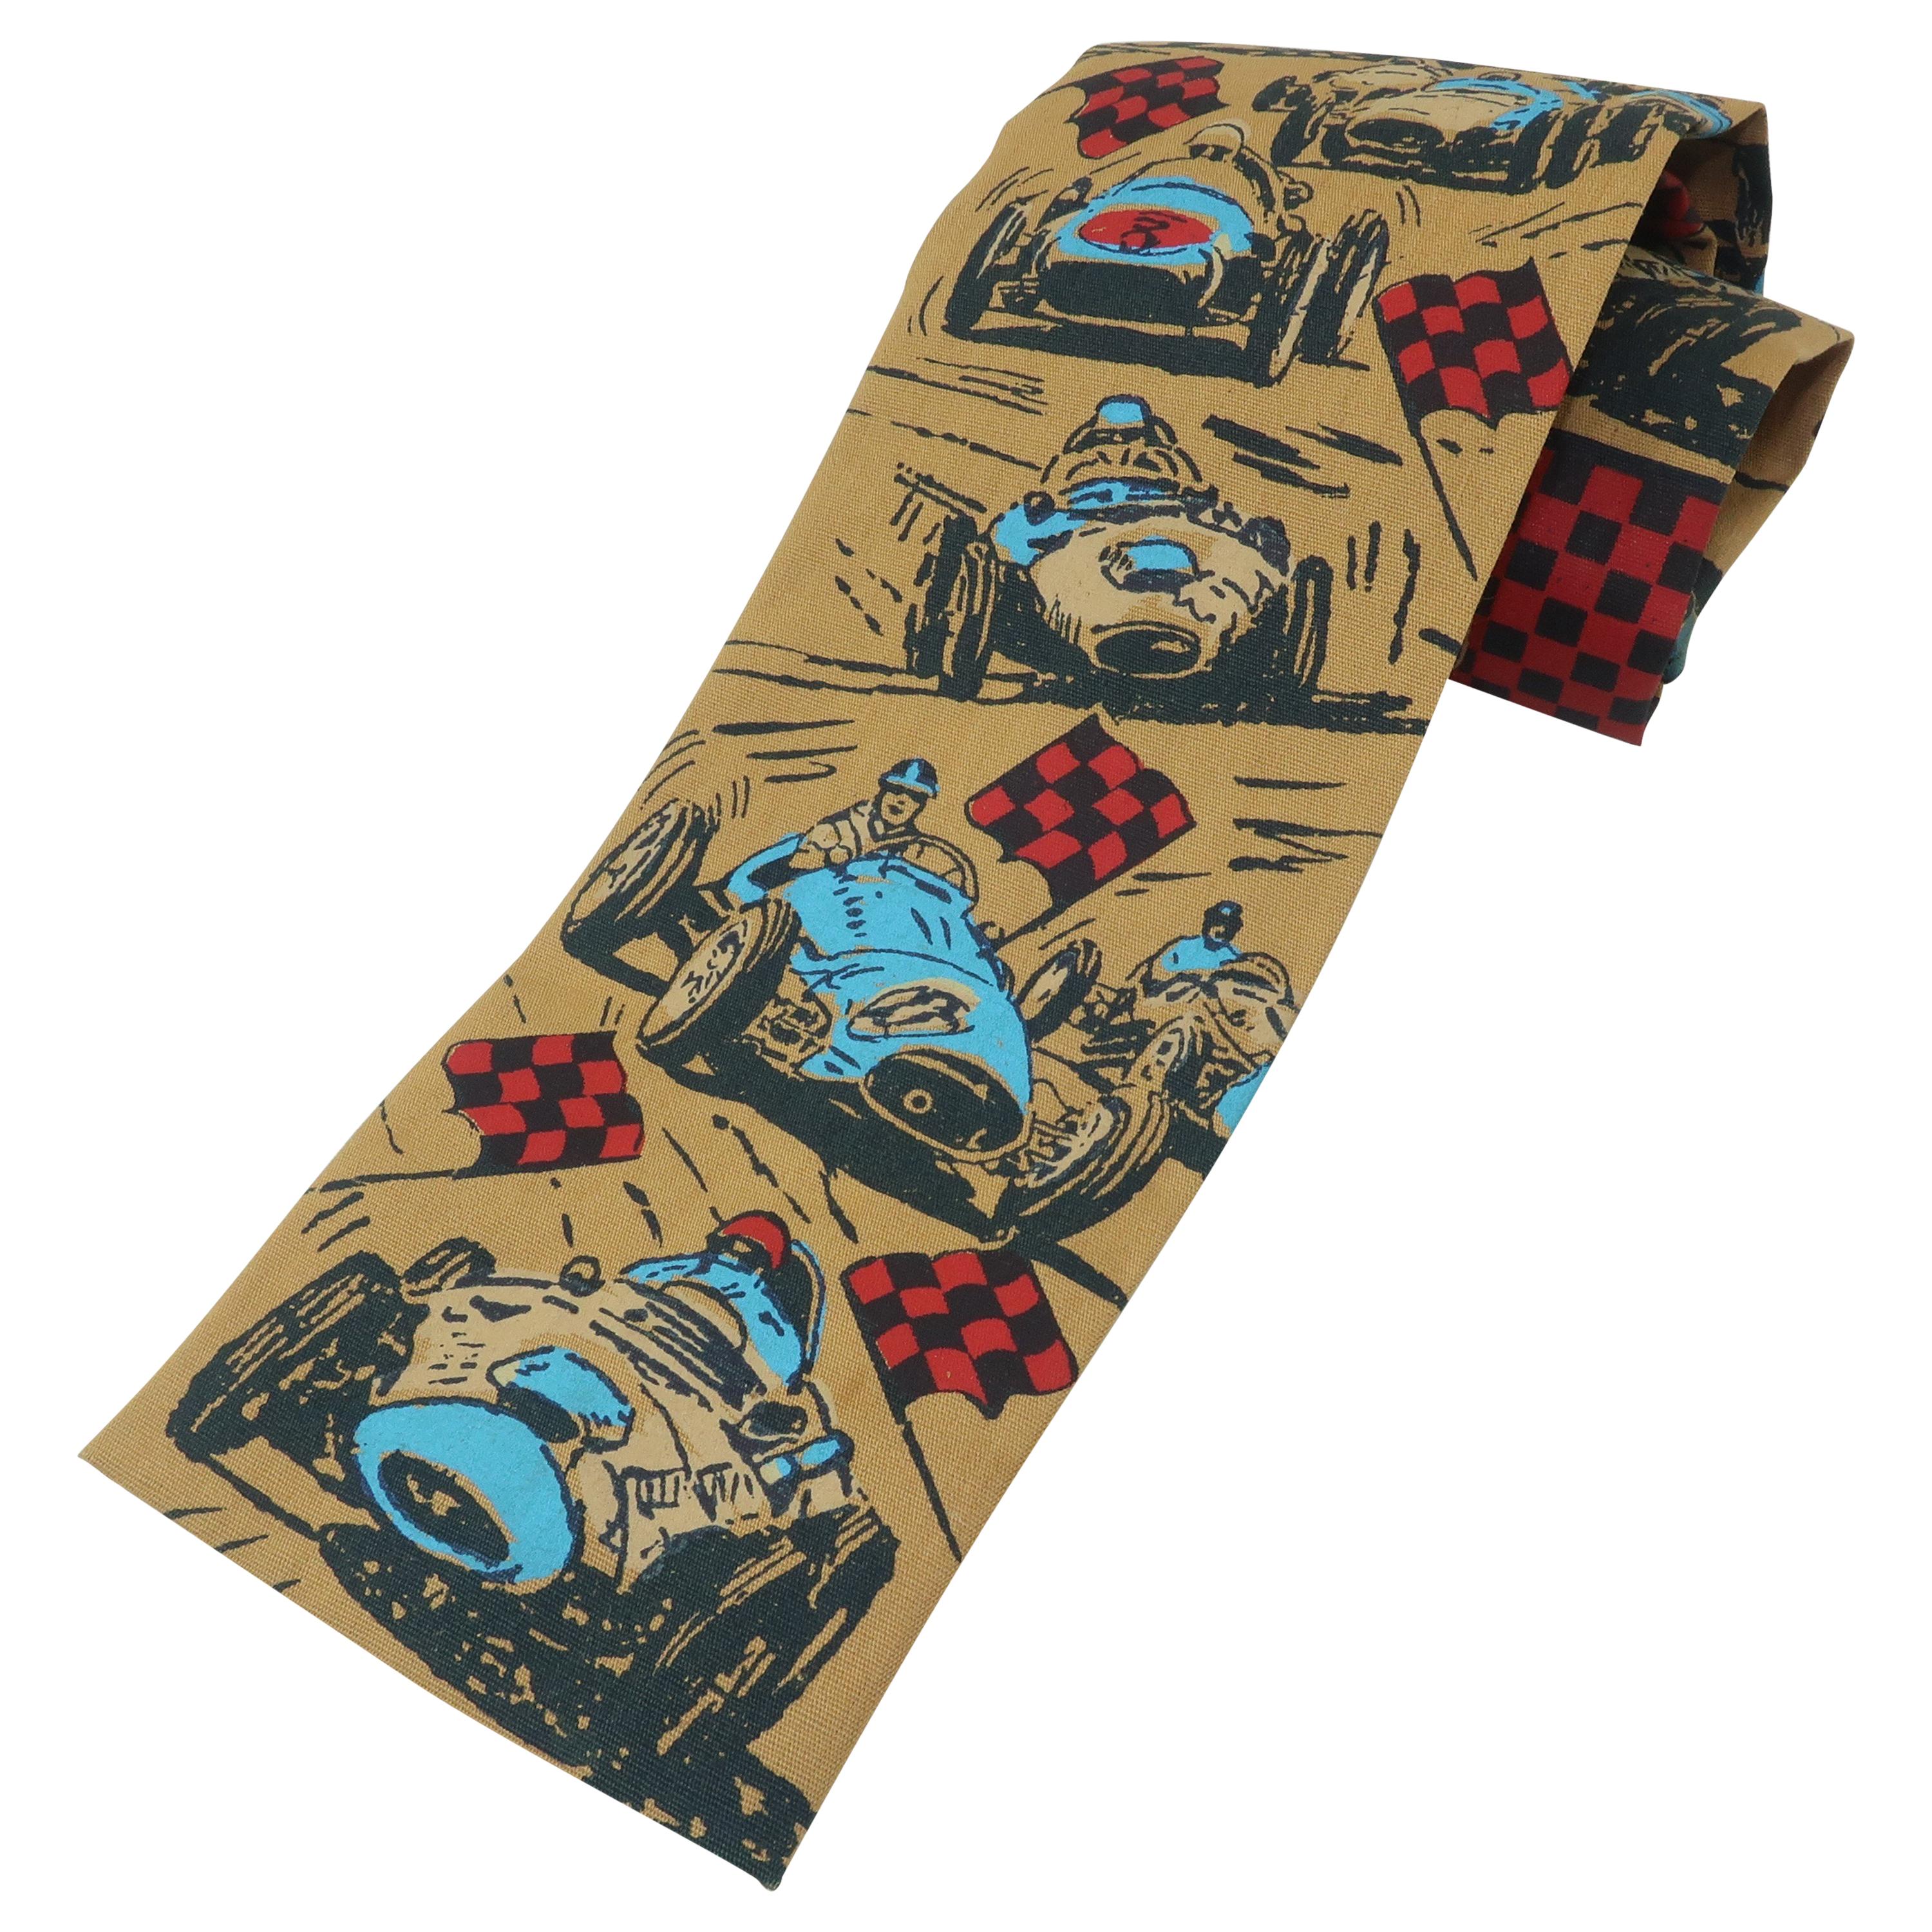 Auto Racing Novelty Square Necktie by Rooster, 1960’s